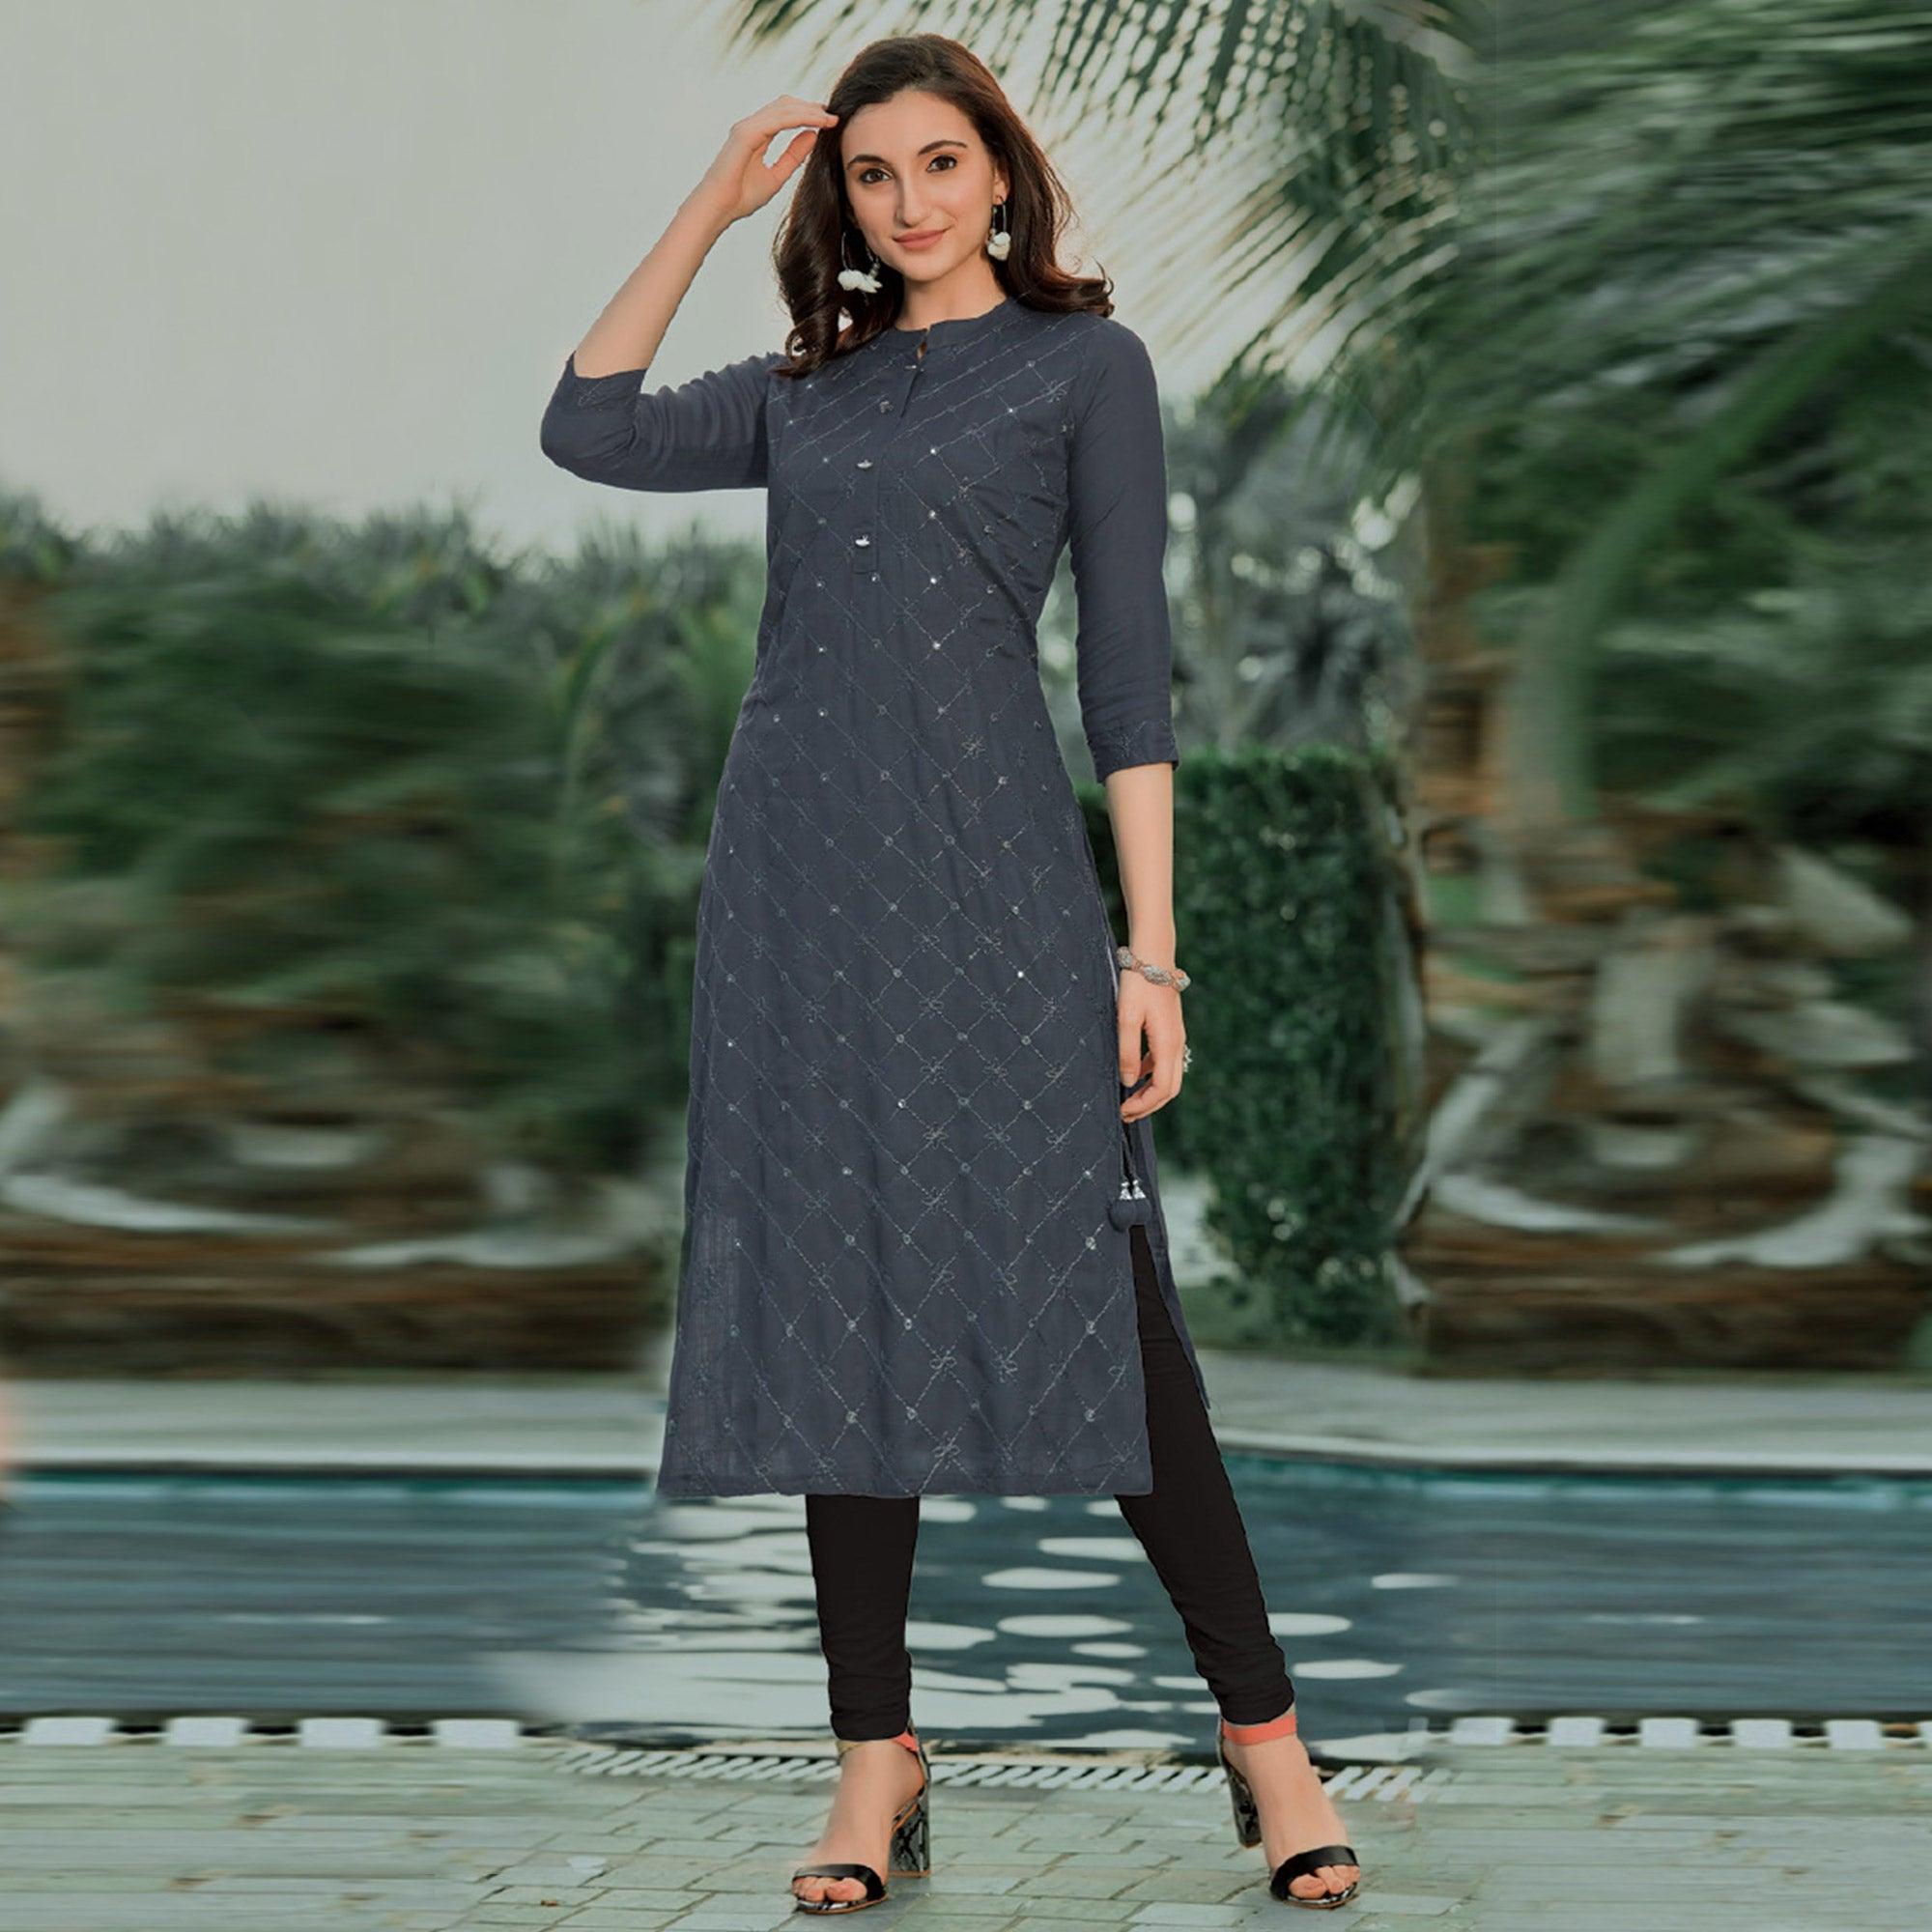 Buy Women's Party Gown| Long Kurti| Dresses| Stiched| Grey Color, Size - XL  at Amazon.in